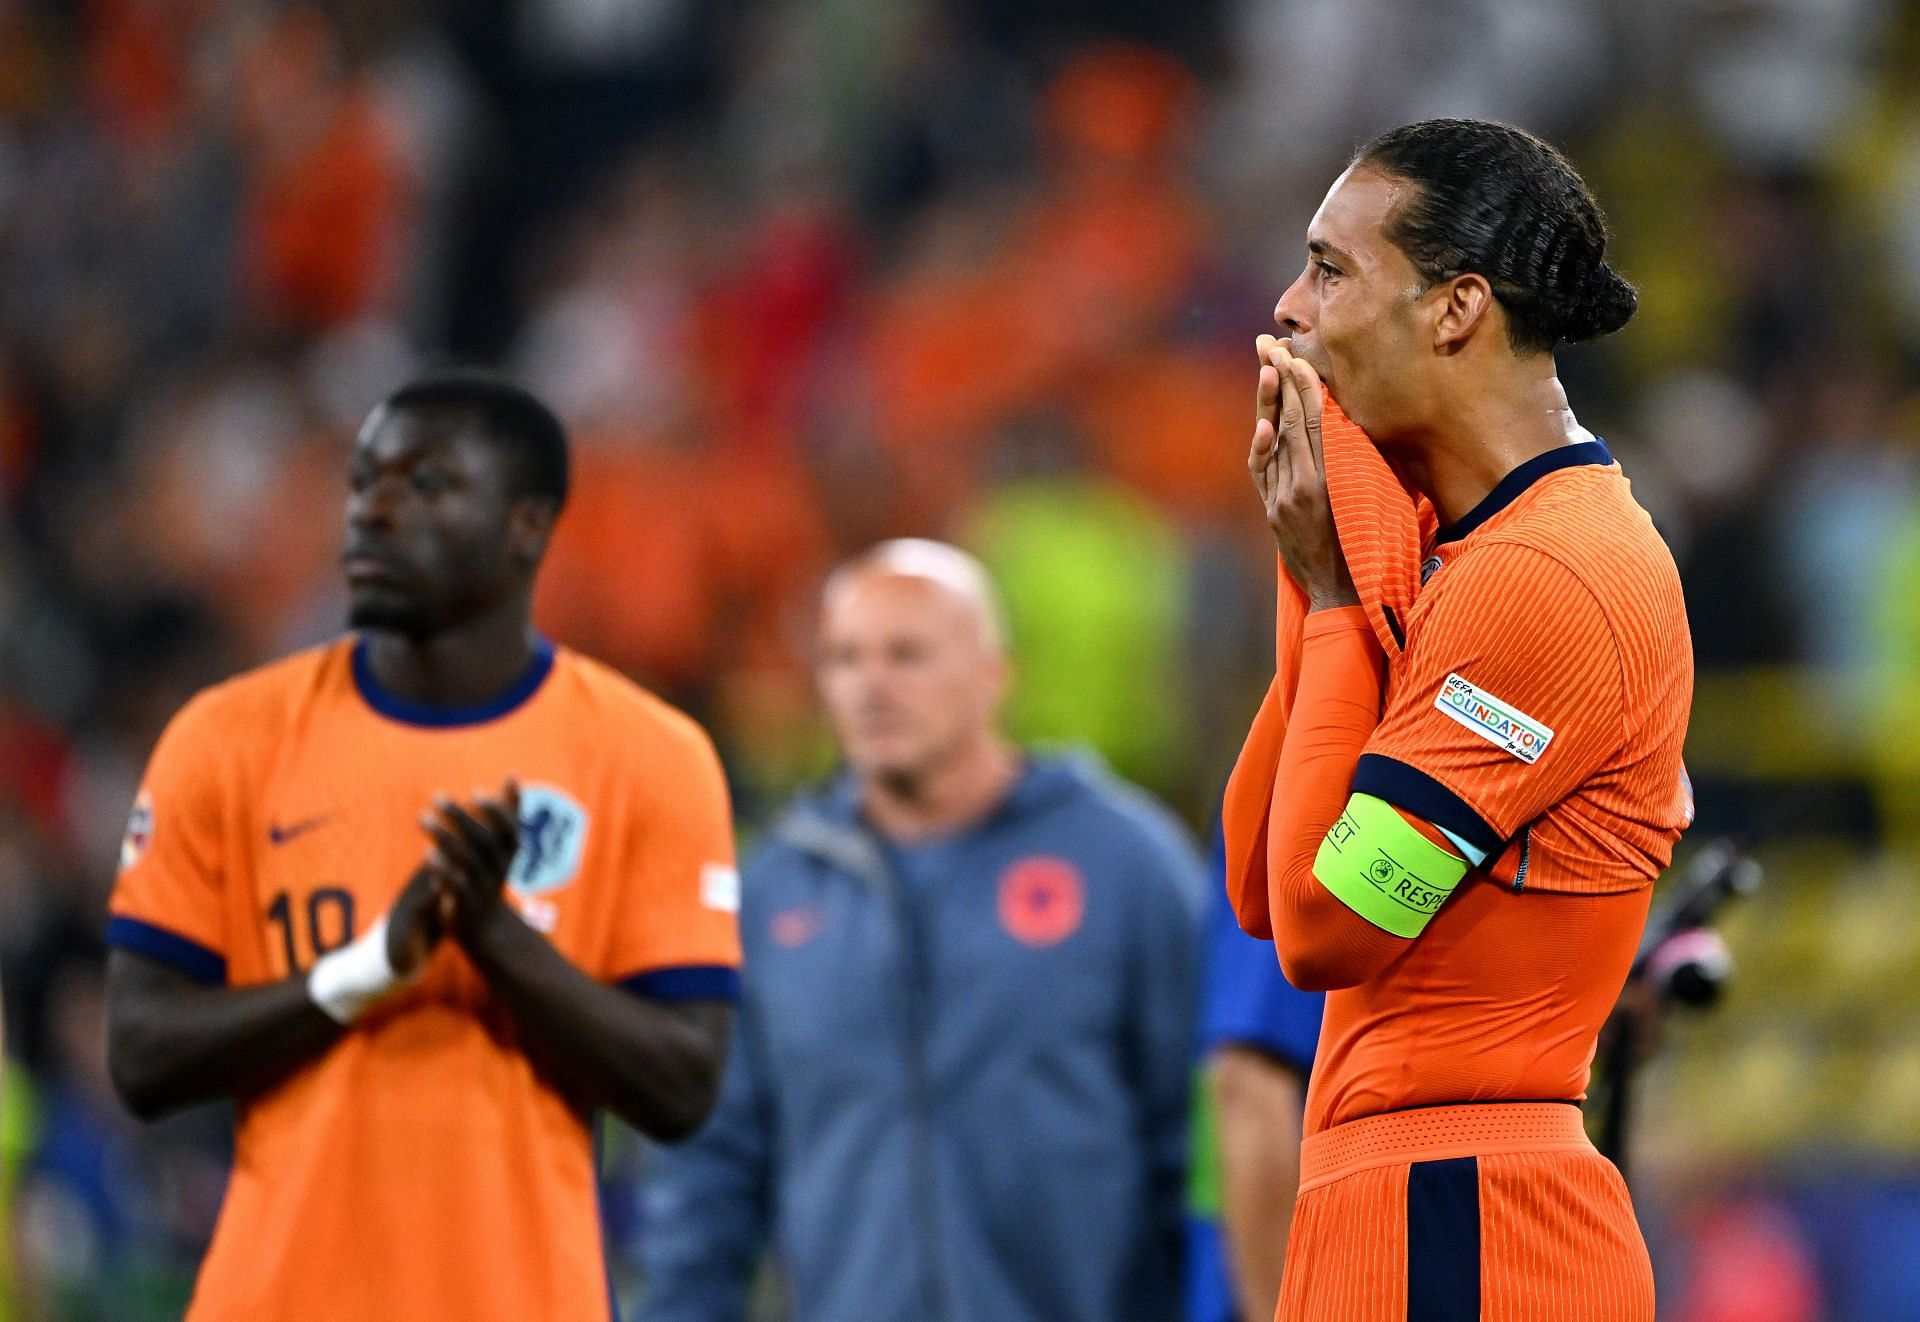 Netherlands 1-2 England: Player ratings as Ollie Watkins netted stoppage time winner to dump Oranje out | UEFA Euro 2024